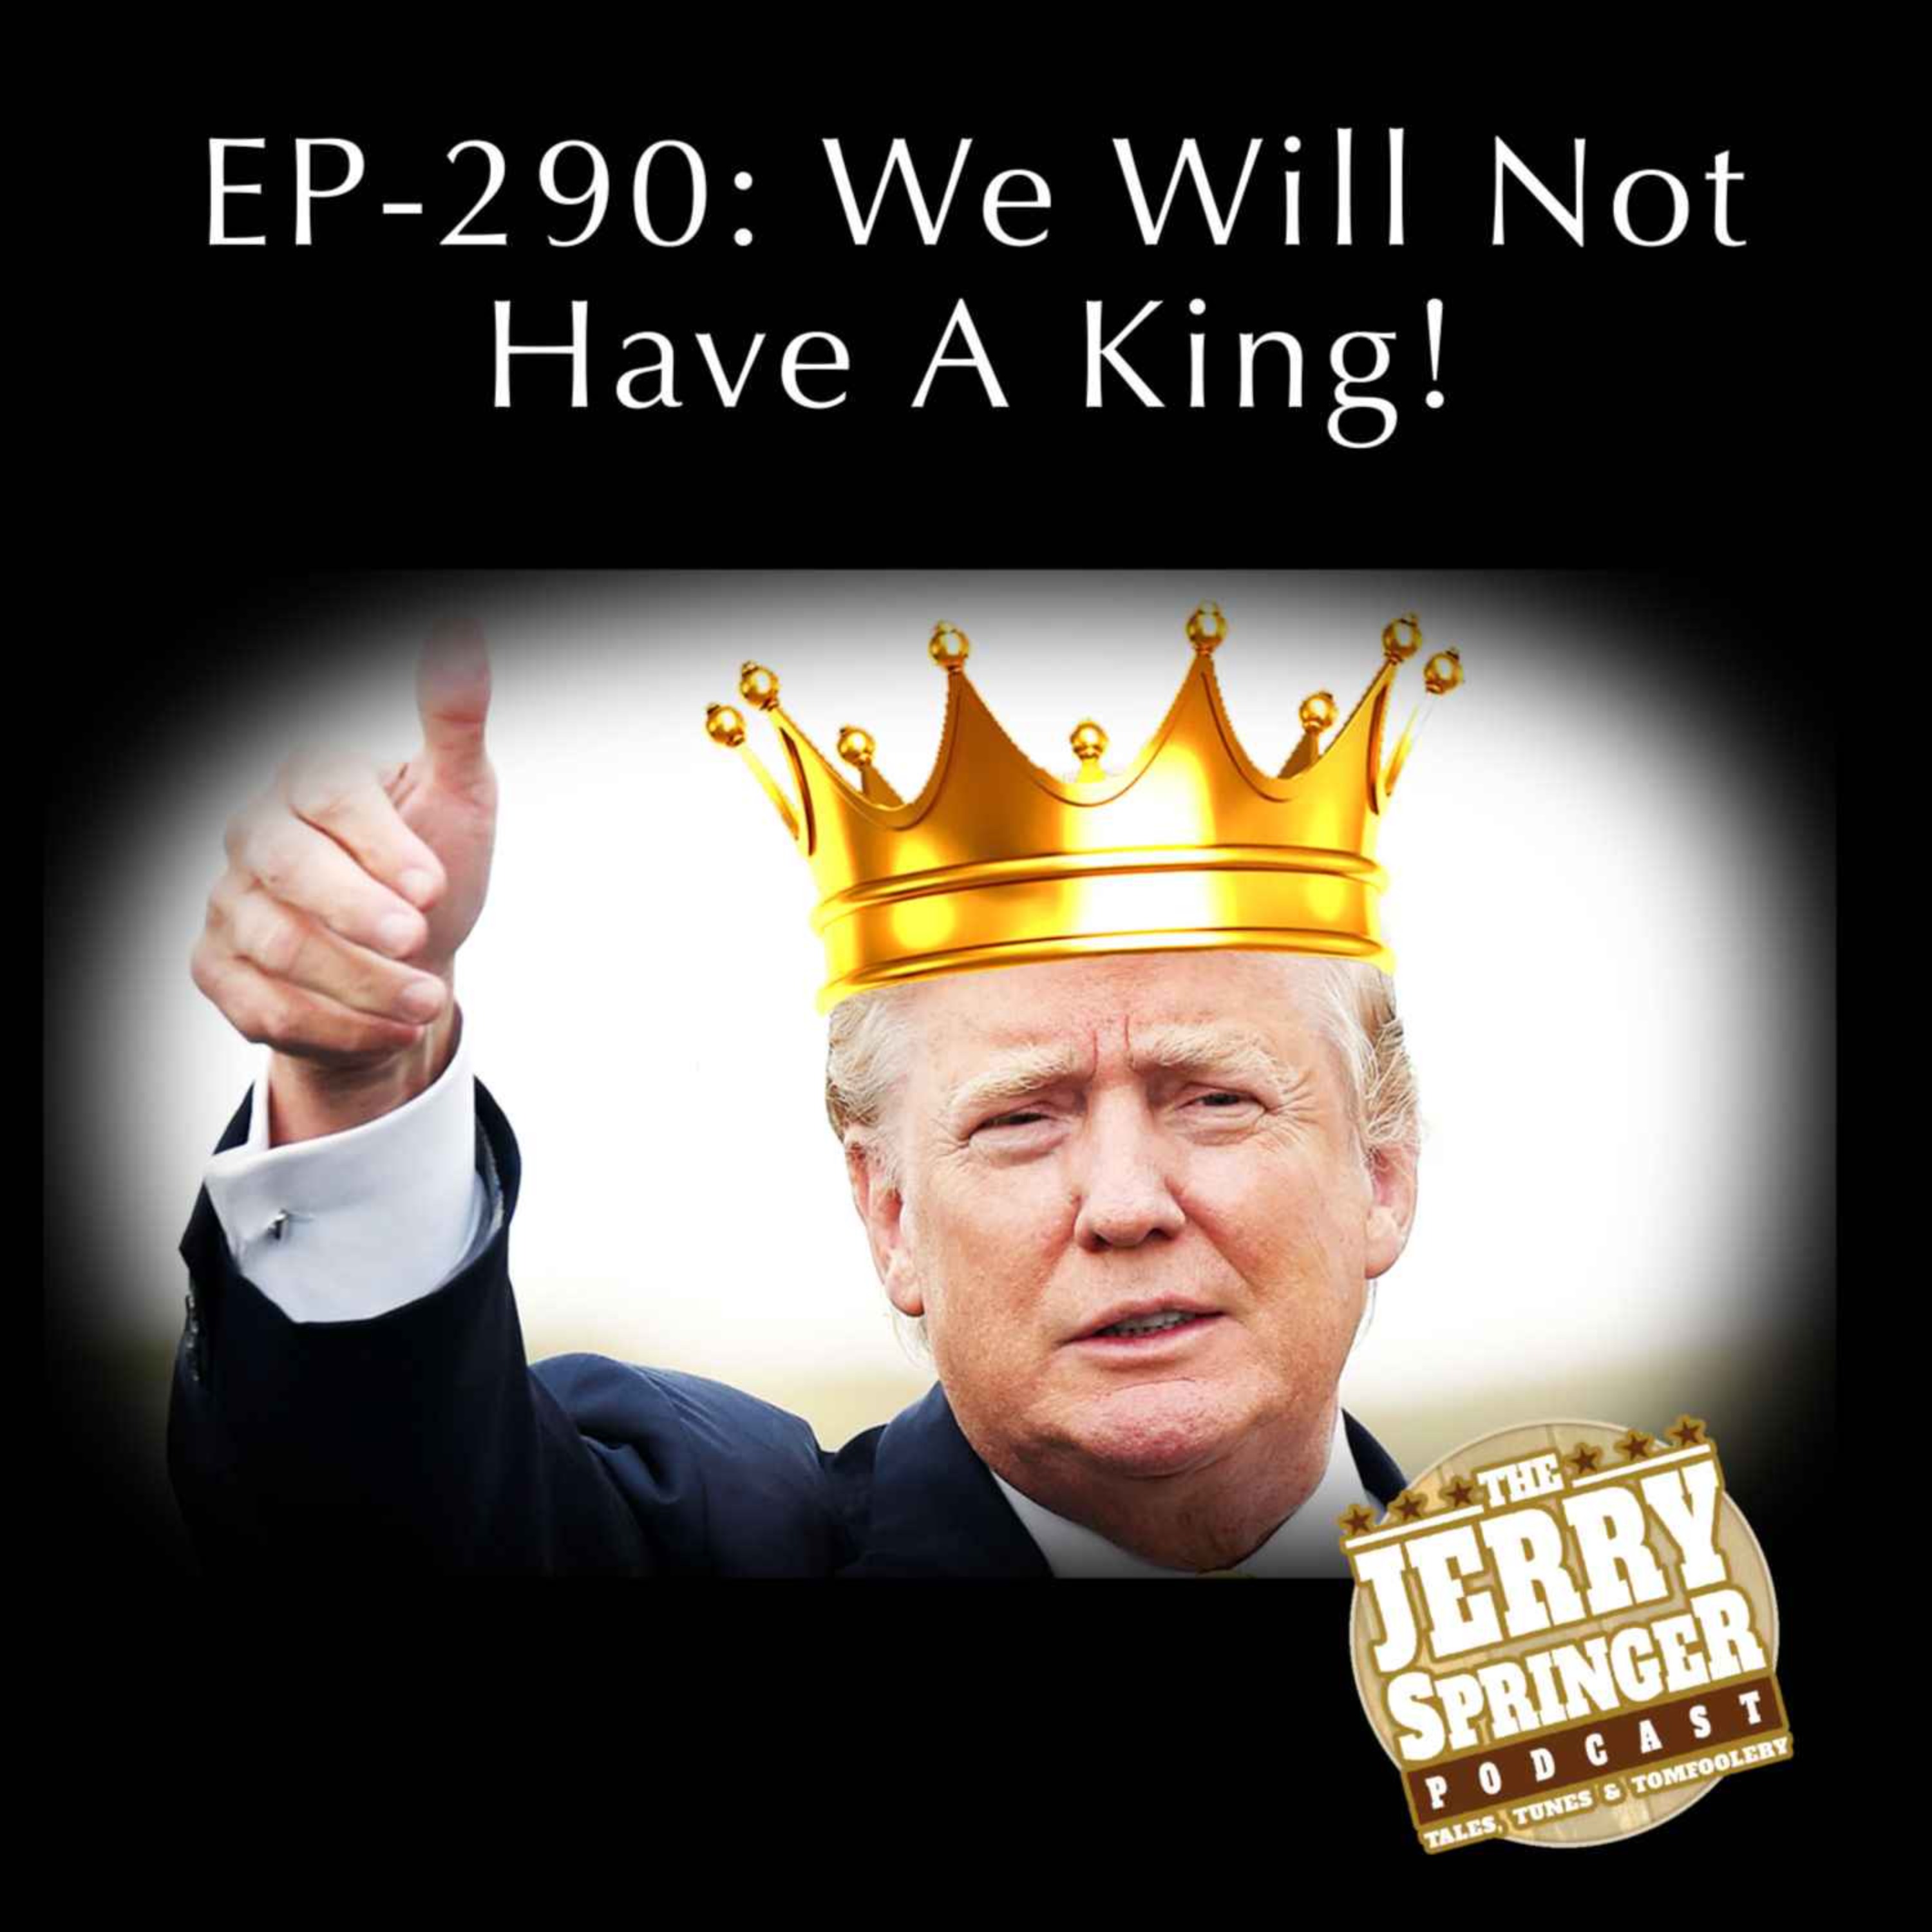 We Will Not Have A King: EP-290